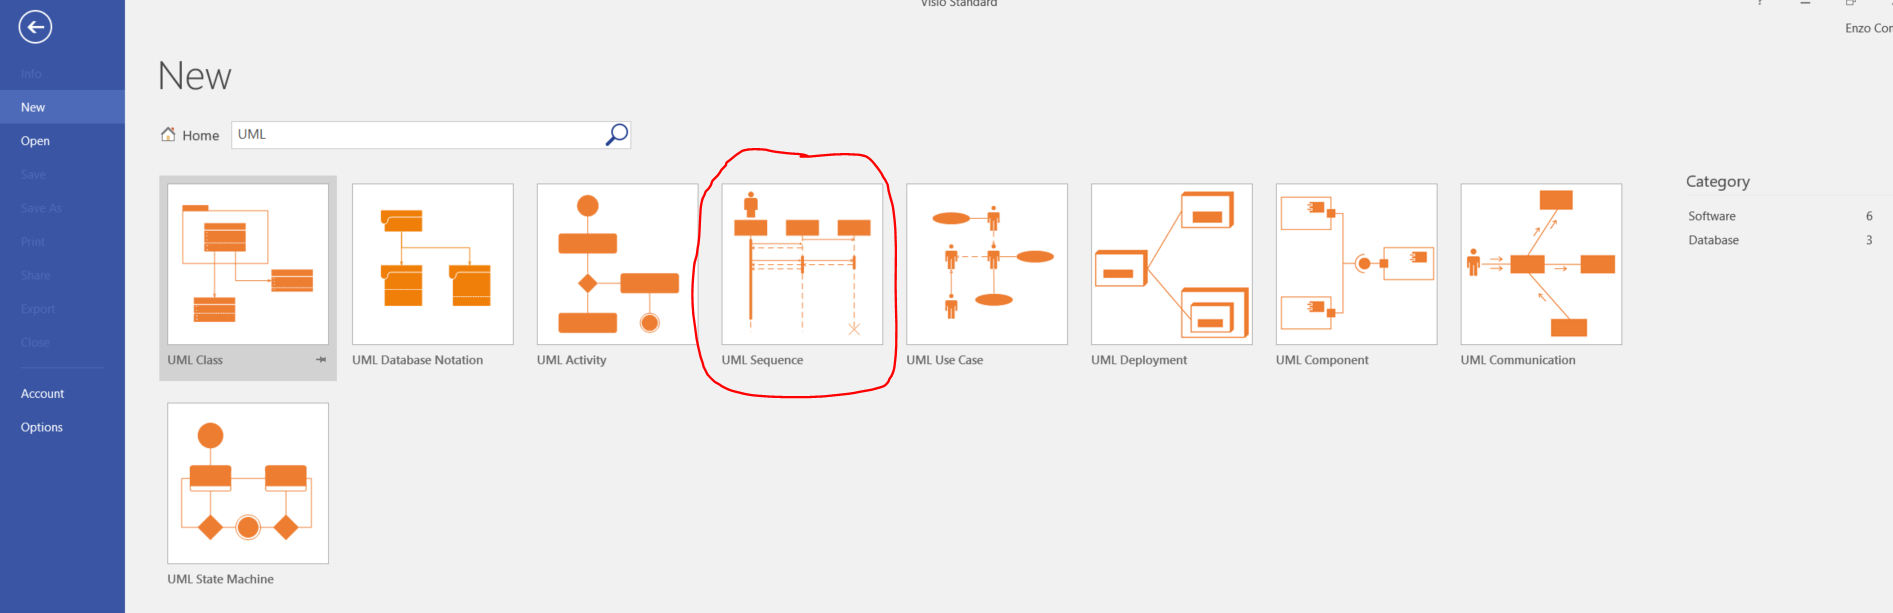 Drawing Uml 2.5 Diagrams With Visio 2016 (Even With The for Create Er Diagram Visio 2016